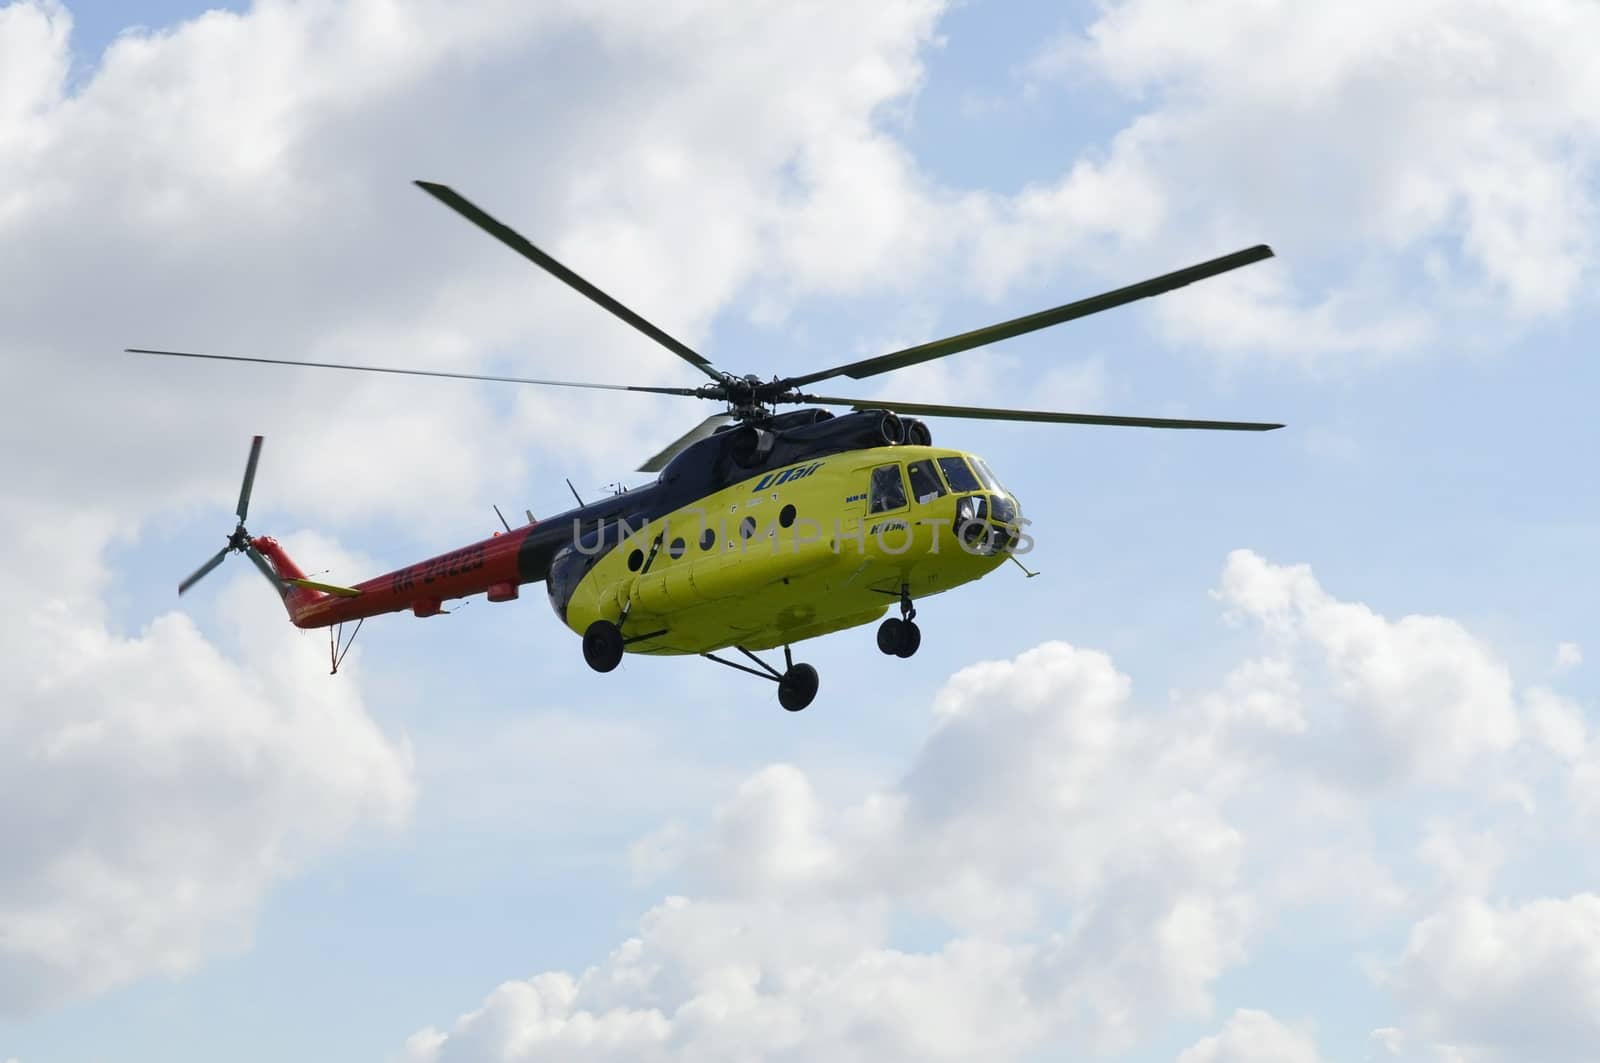 The yellow MI-8 helicopter flies against clouds. by veronka72